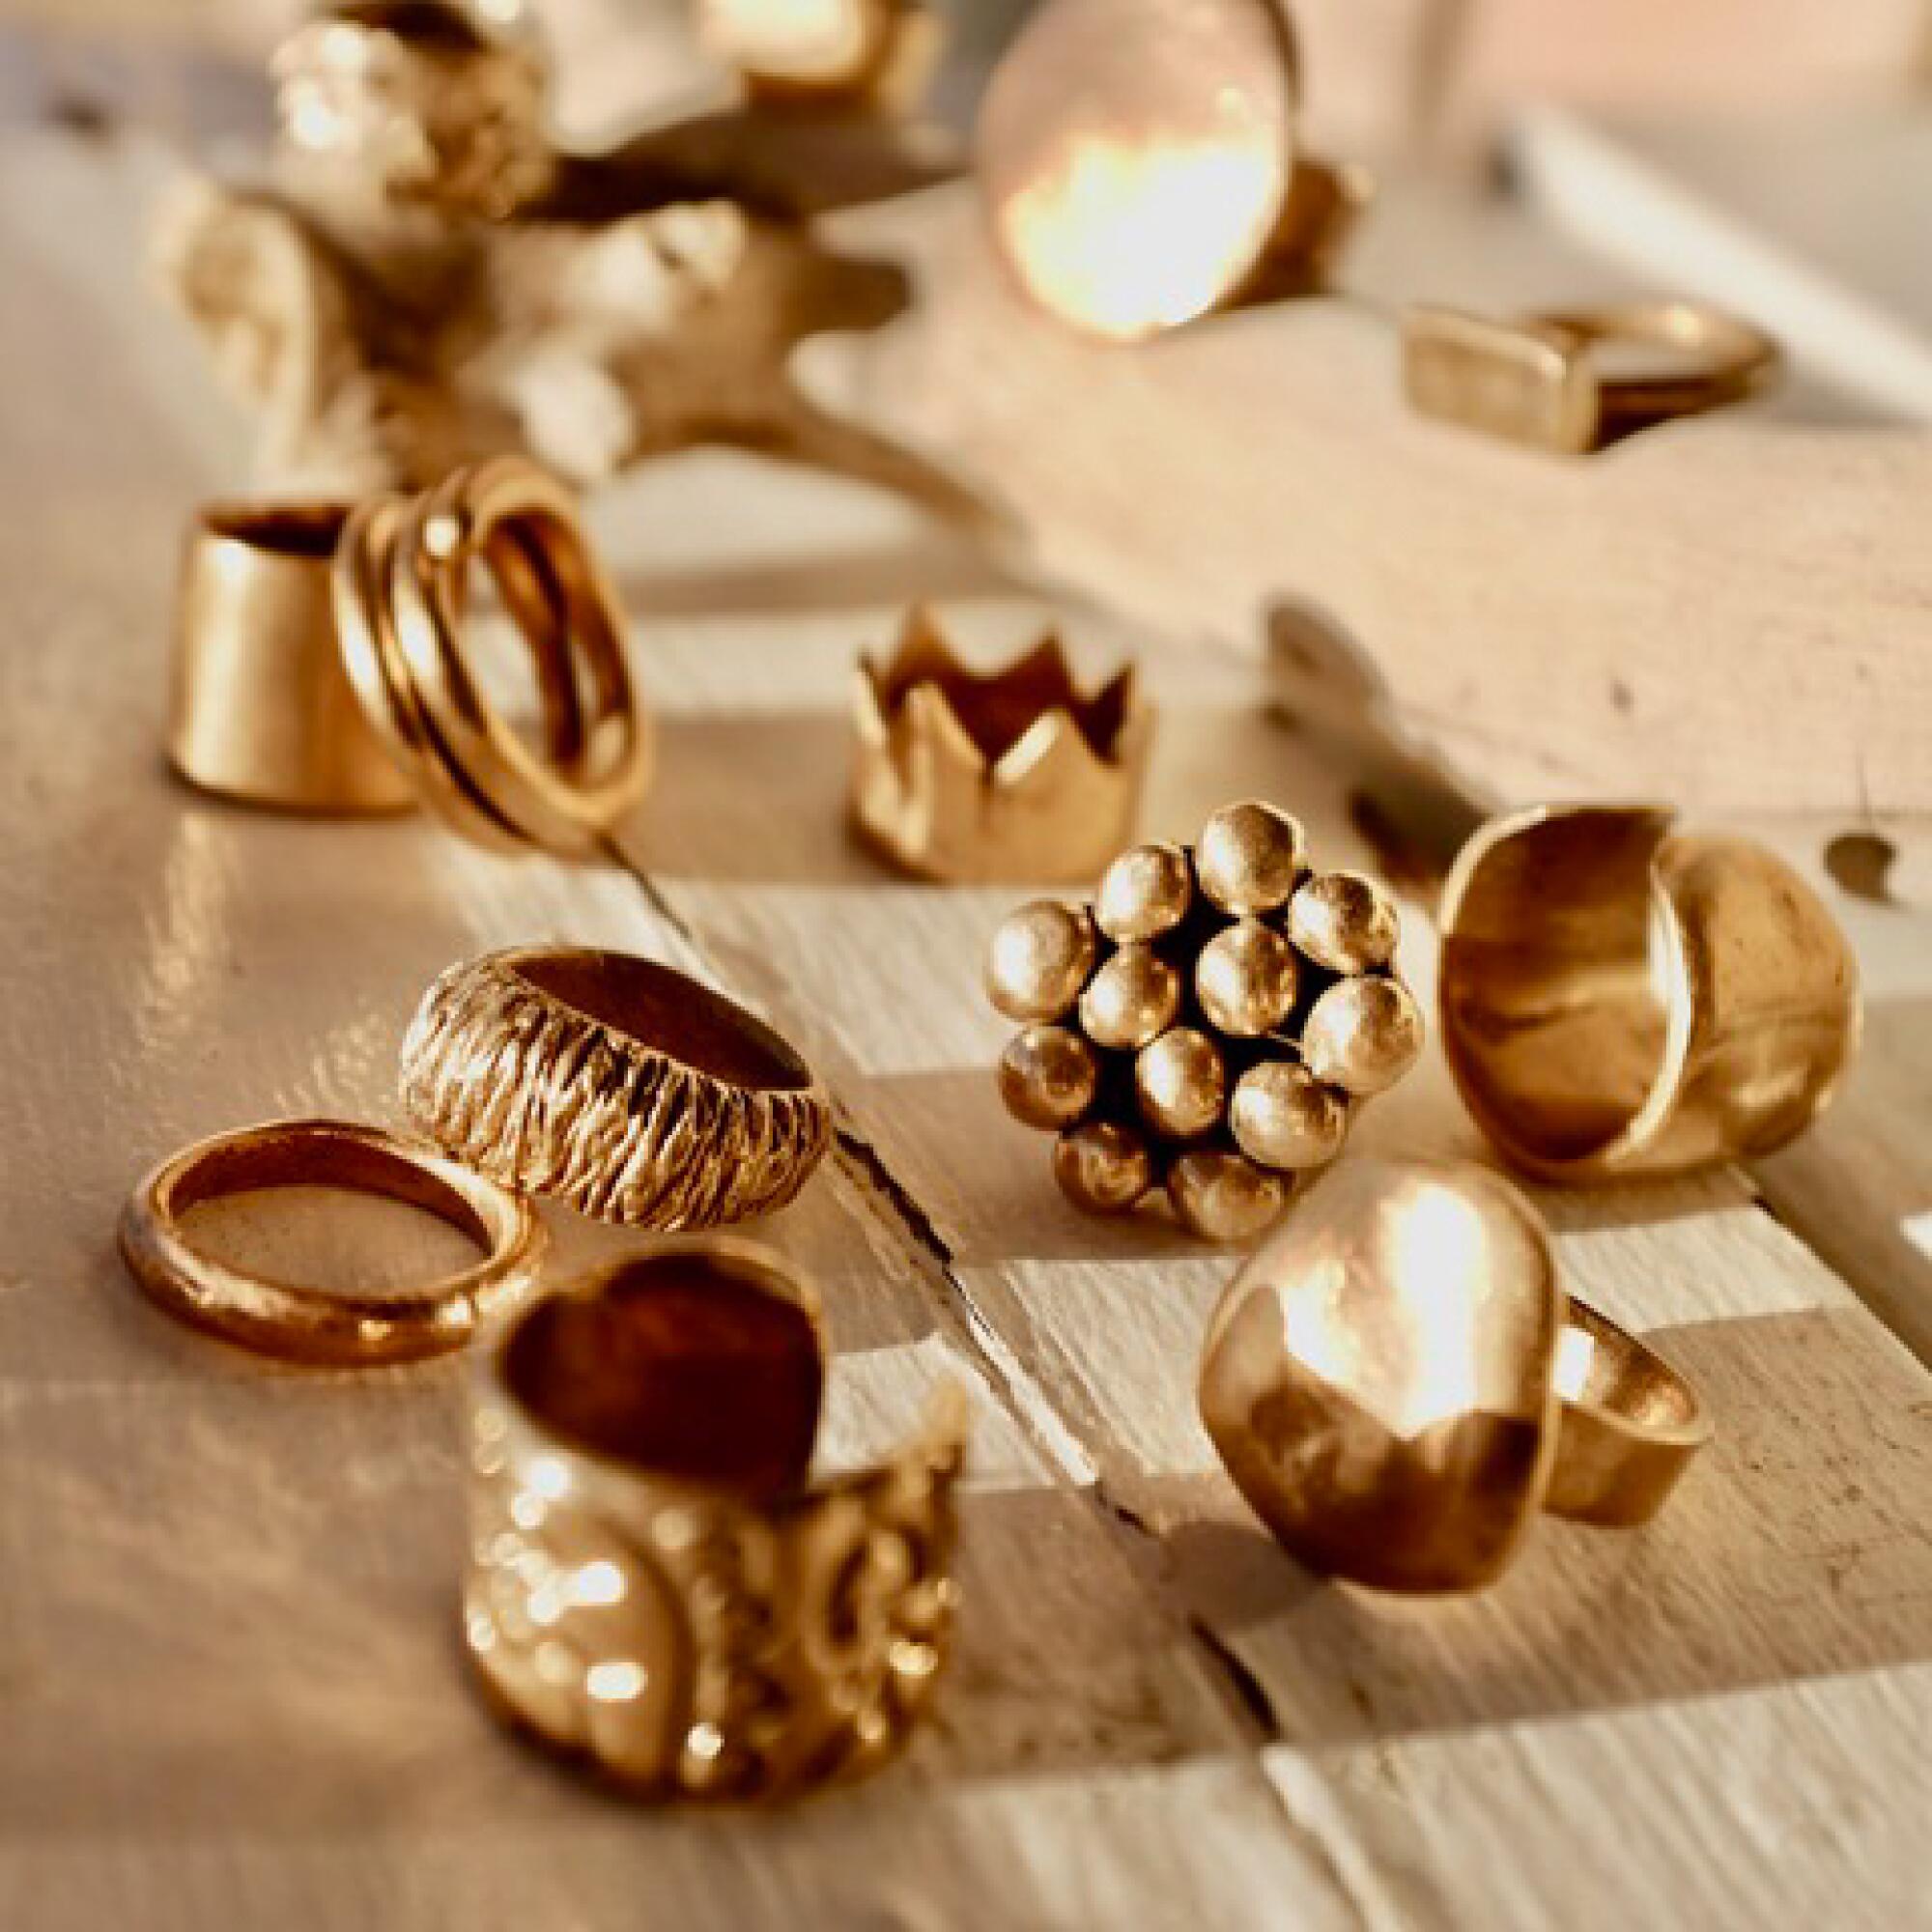 Assorted hand-sculpted bronze rings by Lili T.